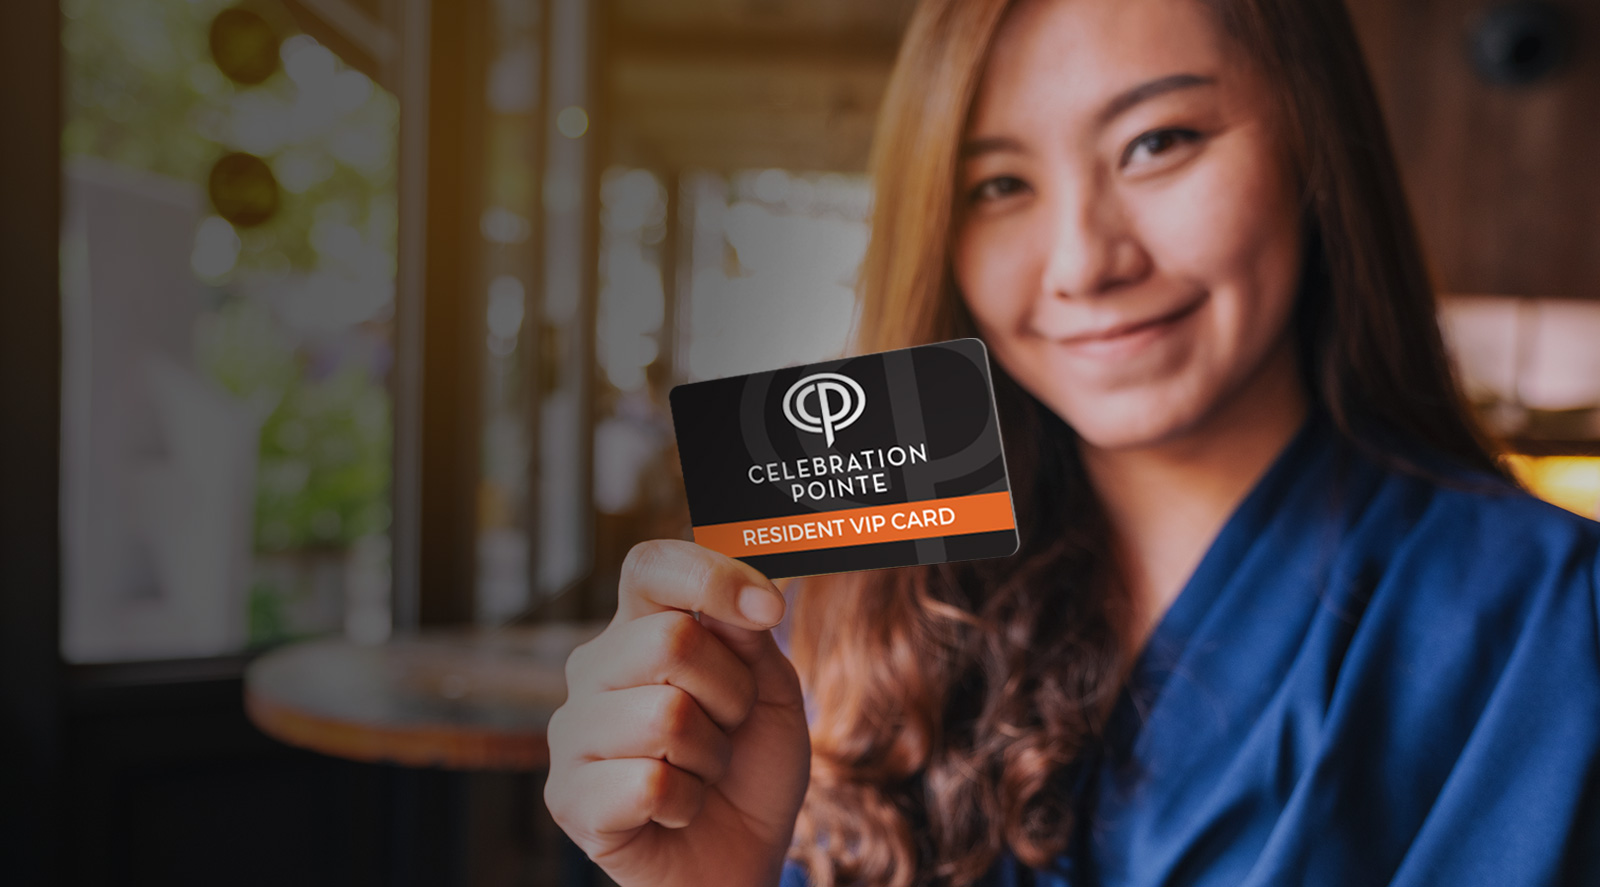 young woman smiling and holding a Celebration Pointe Resident VIP Card